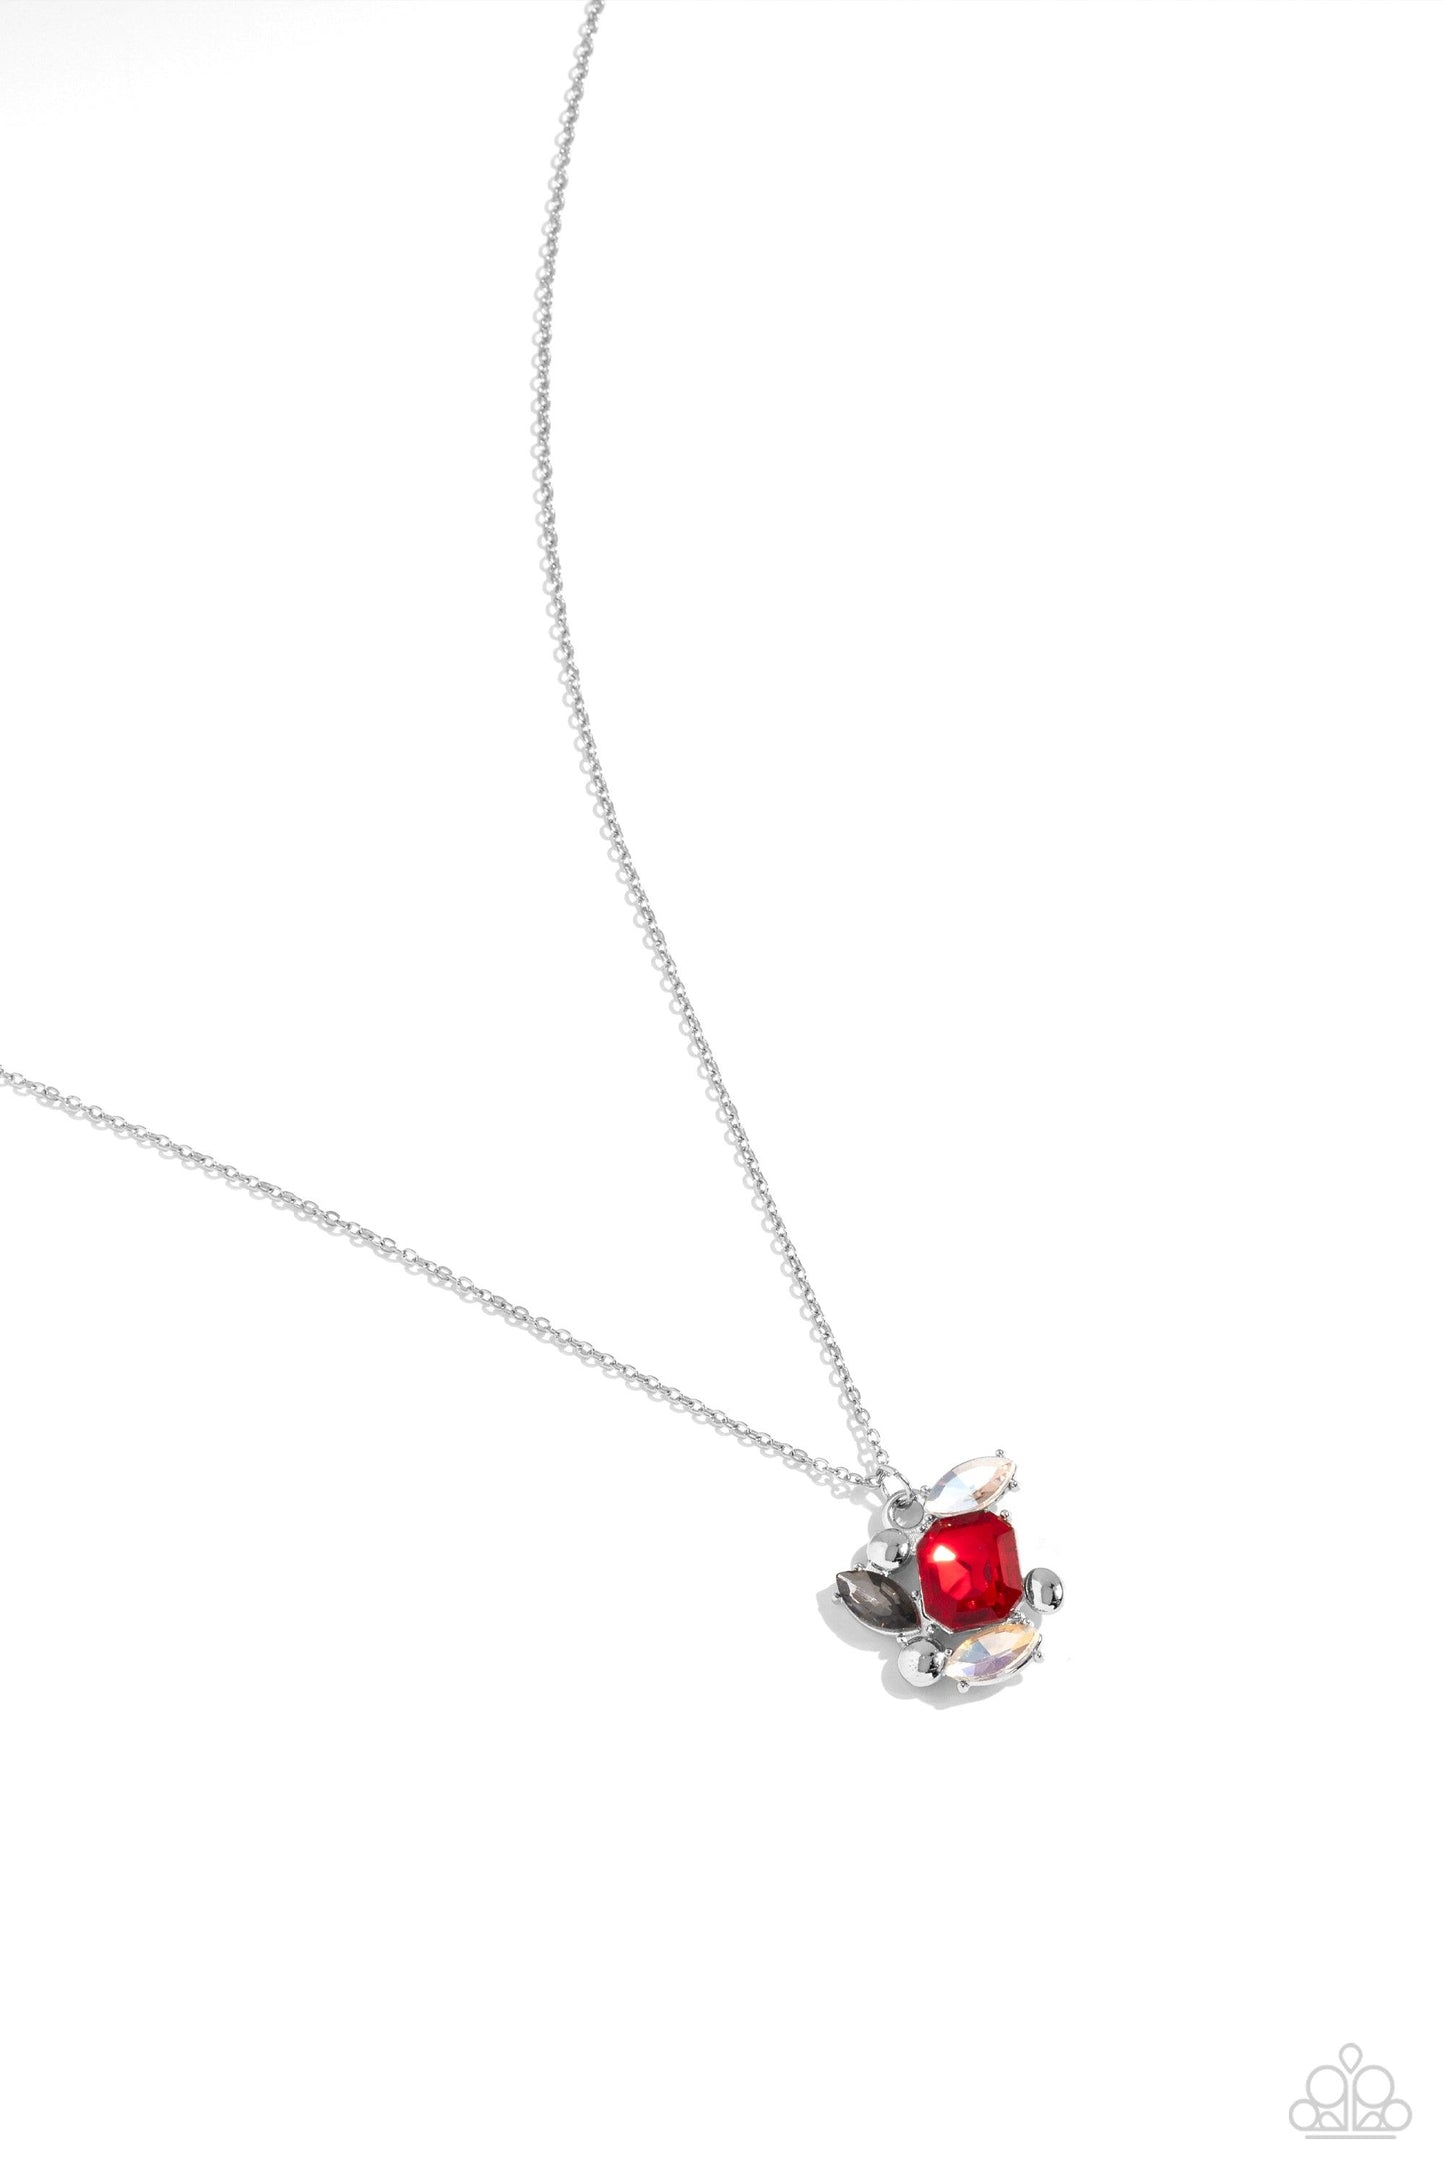 Paparazzi Accessories - Prismatic Projection - Red Necklace - Bling by JessieK